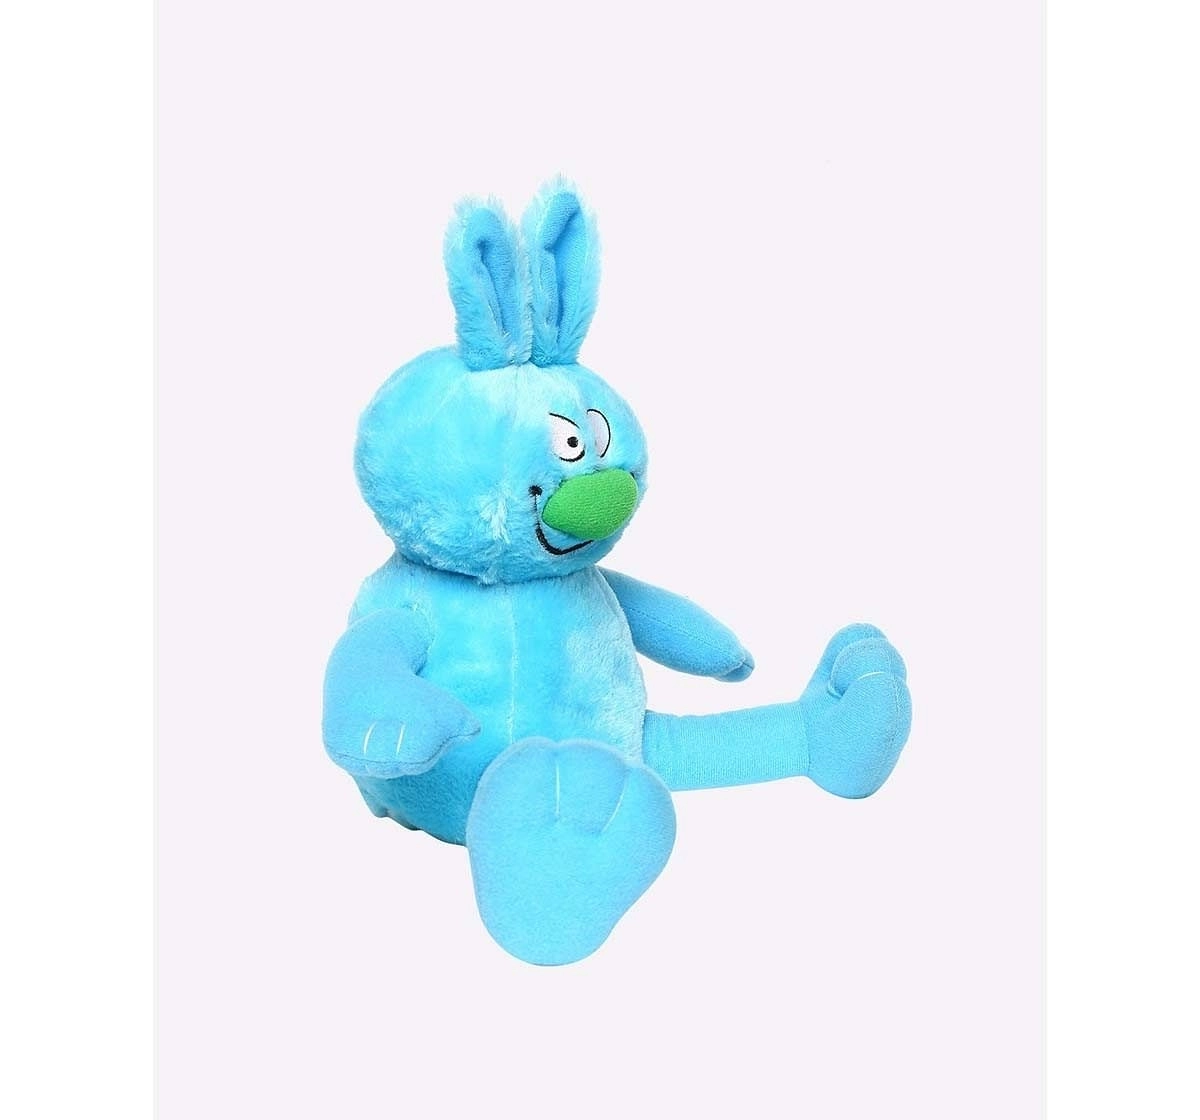 Hamleys Movers & Shakers Blue Ziggles Interactive Soft Toys for Kids Age 3Y+ - 26 Cm (Blue)